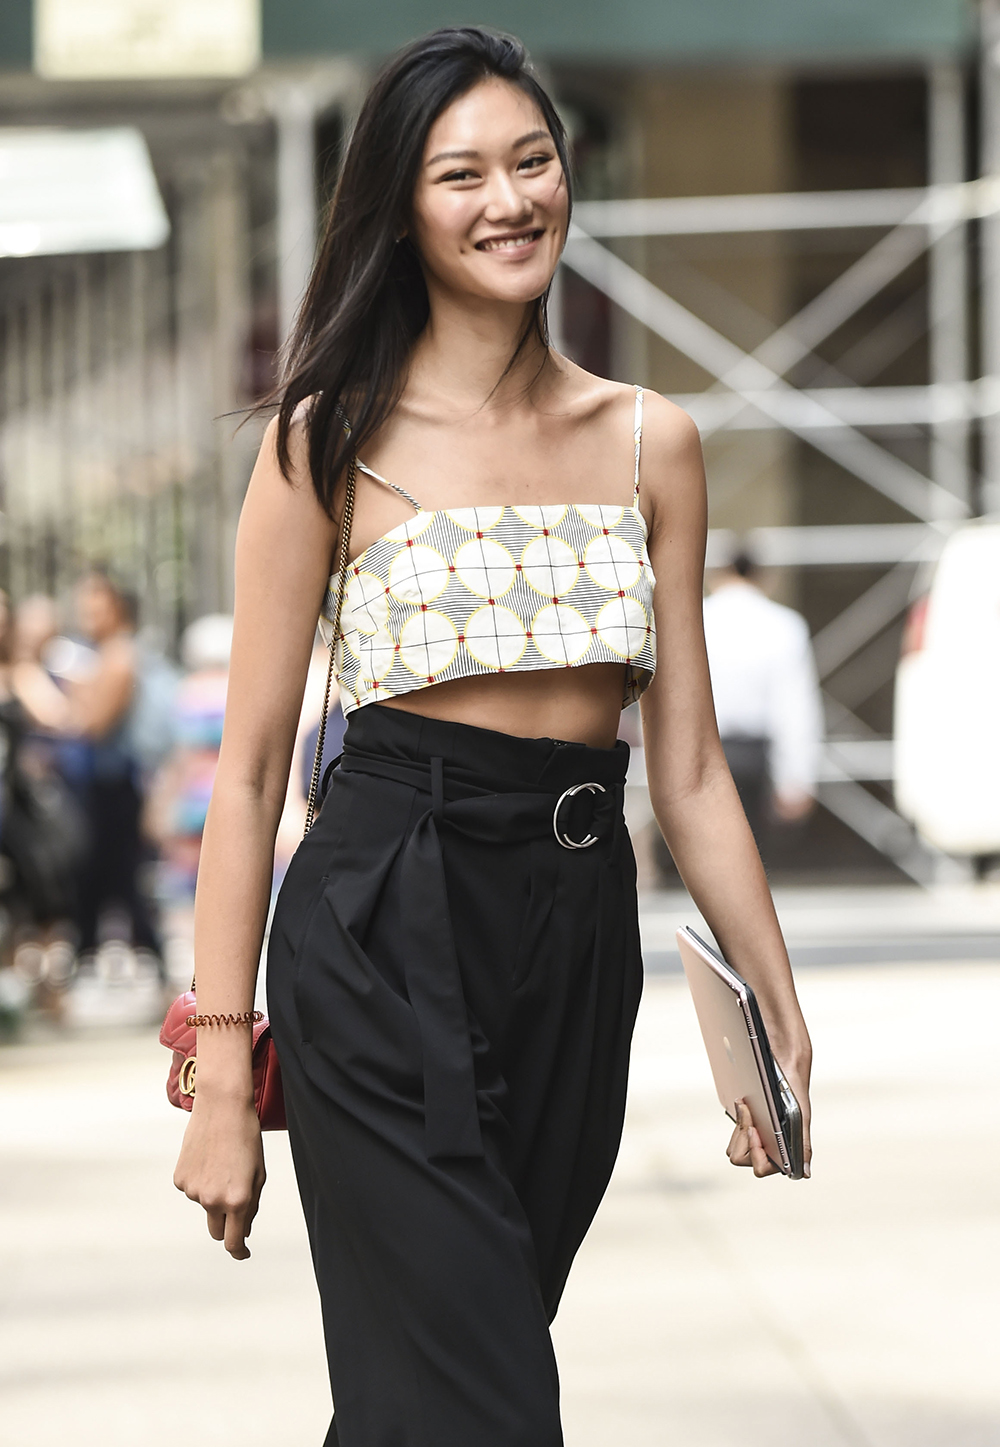 NEW YORK, NY - AUGUST 30: Jessie Li attends the casting for the 2018 Victoria's Secret Fashion Show in Midtown on August 30, 2018 in New York City. (Photo by Daniel Zuchnik/GC Images)